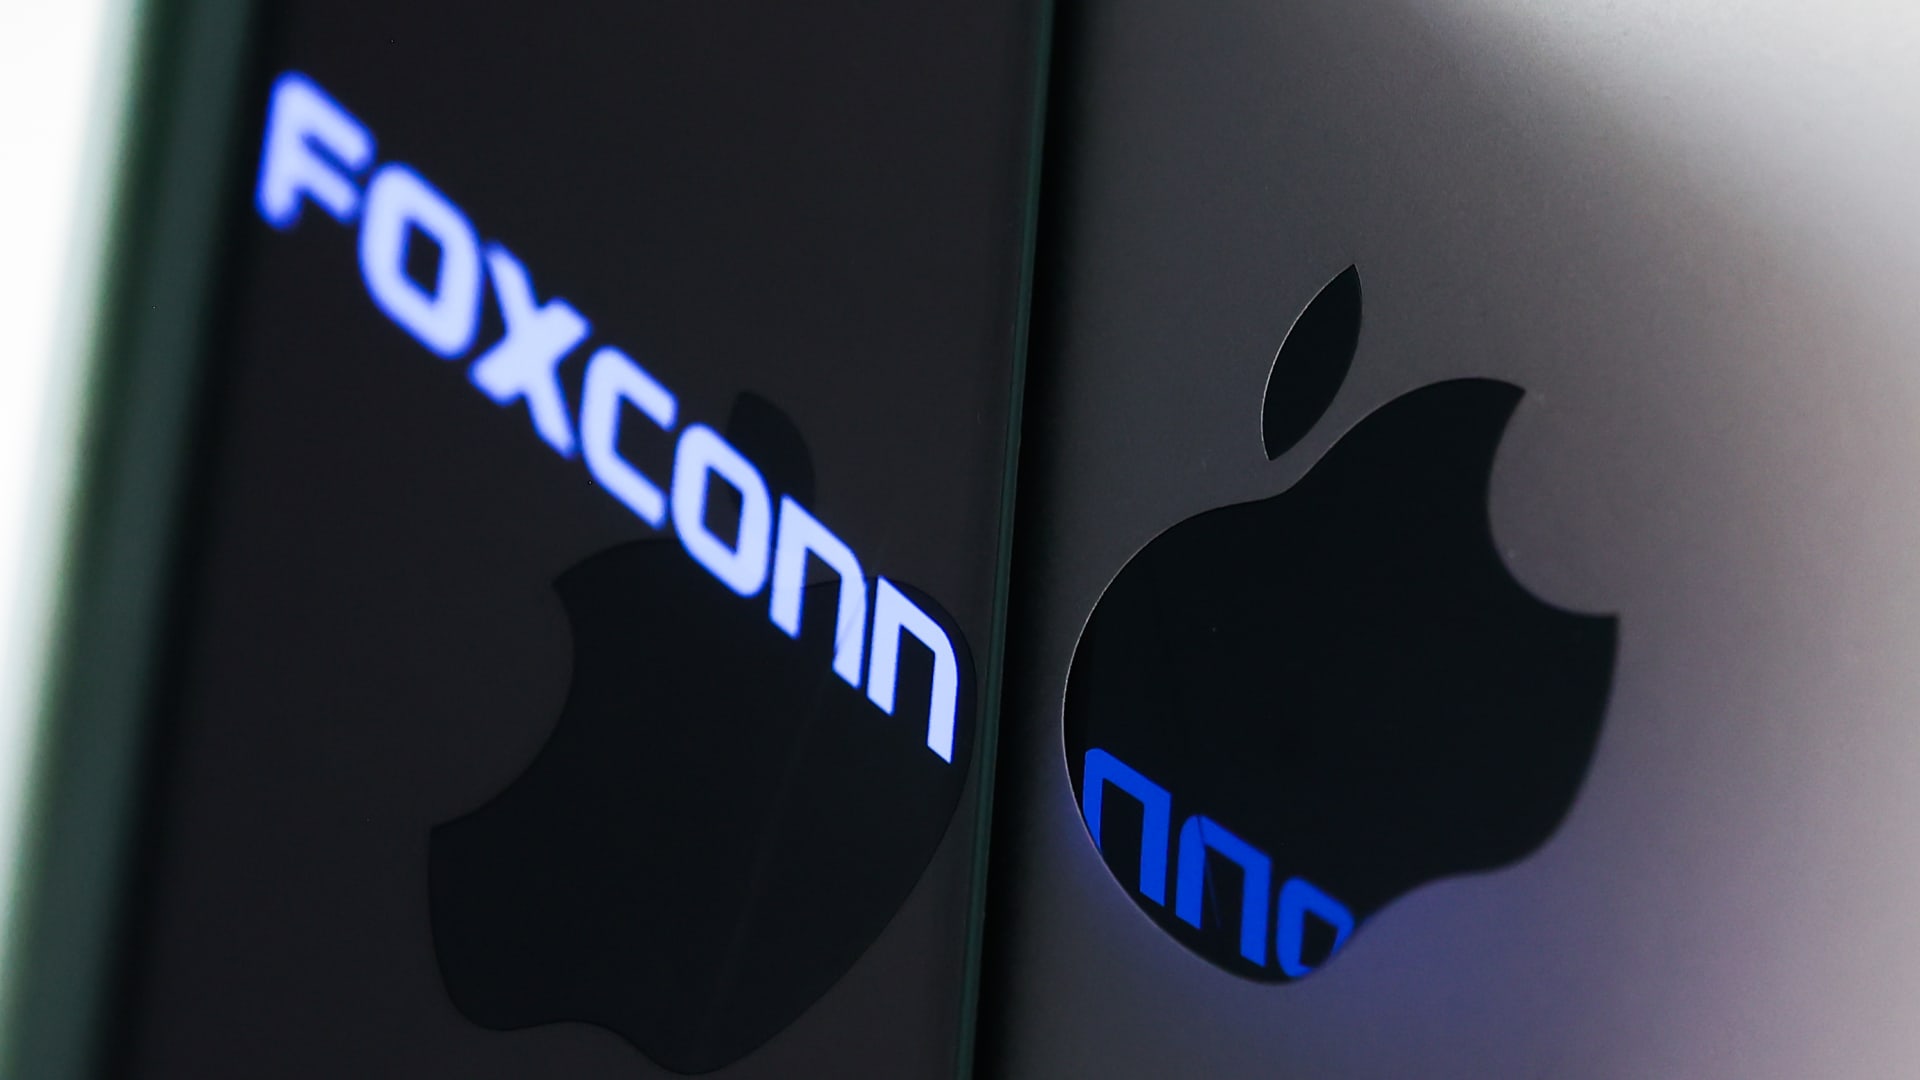 iPhone maker Foxconn entices workers in China to return after unrest